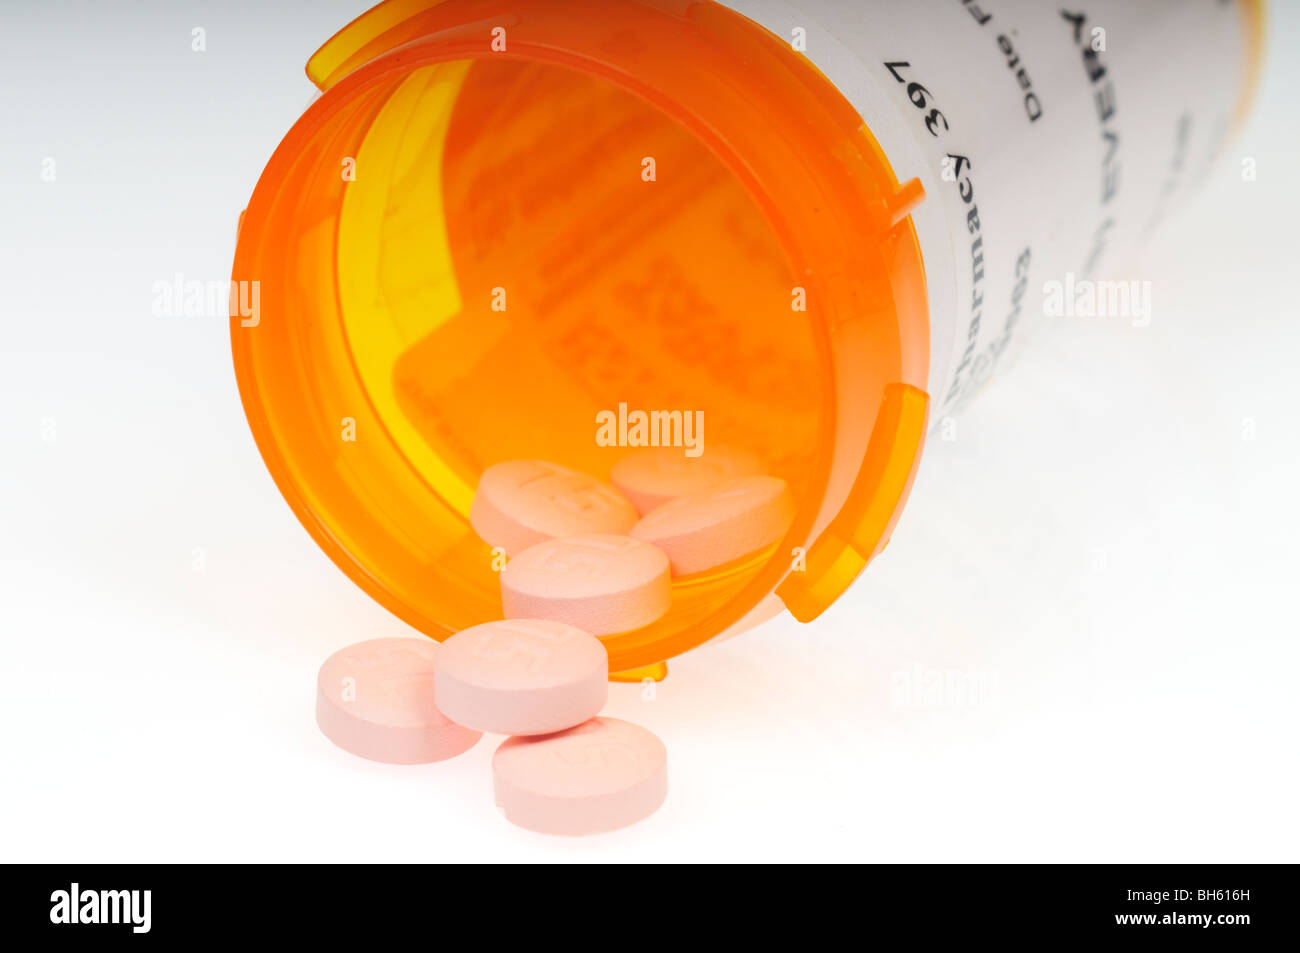 Prescription bottle of the anti-platelet medication plavix on side with plavix pills that is used to  treat P.A.D. Stock Photo